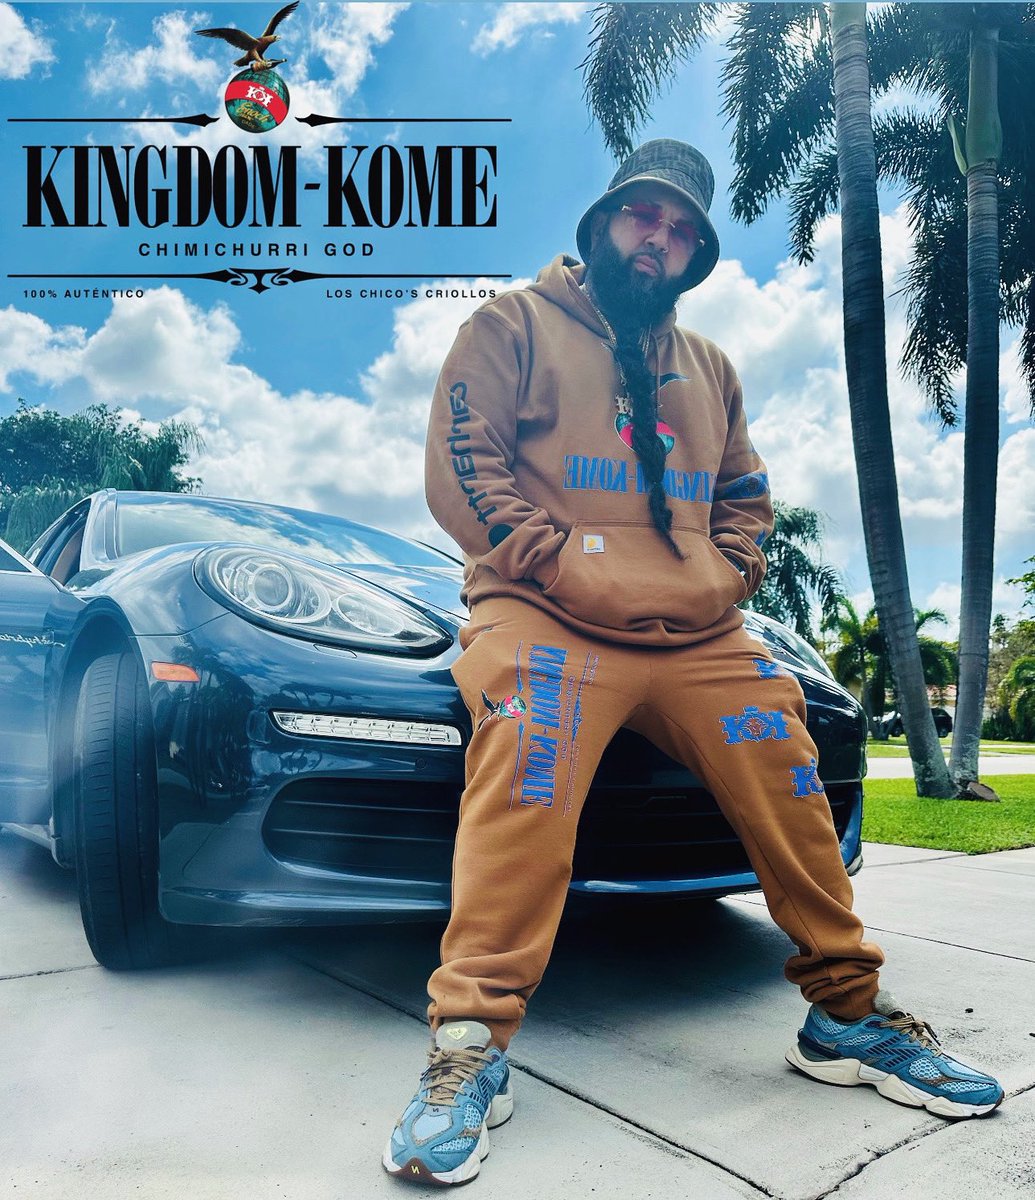 Model citizen, you just model the trends. 
🦅🌍

📸: @l.h.rodriguez 
.
.
.
#kingdomkome #donchimichurri #loschicoscriollos #miami 
#dadefamilia #flyshitonly #lolife #dadefam #worldwide #ootd #chimichurriGOD #miamihiphop #streetphotography